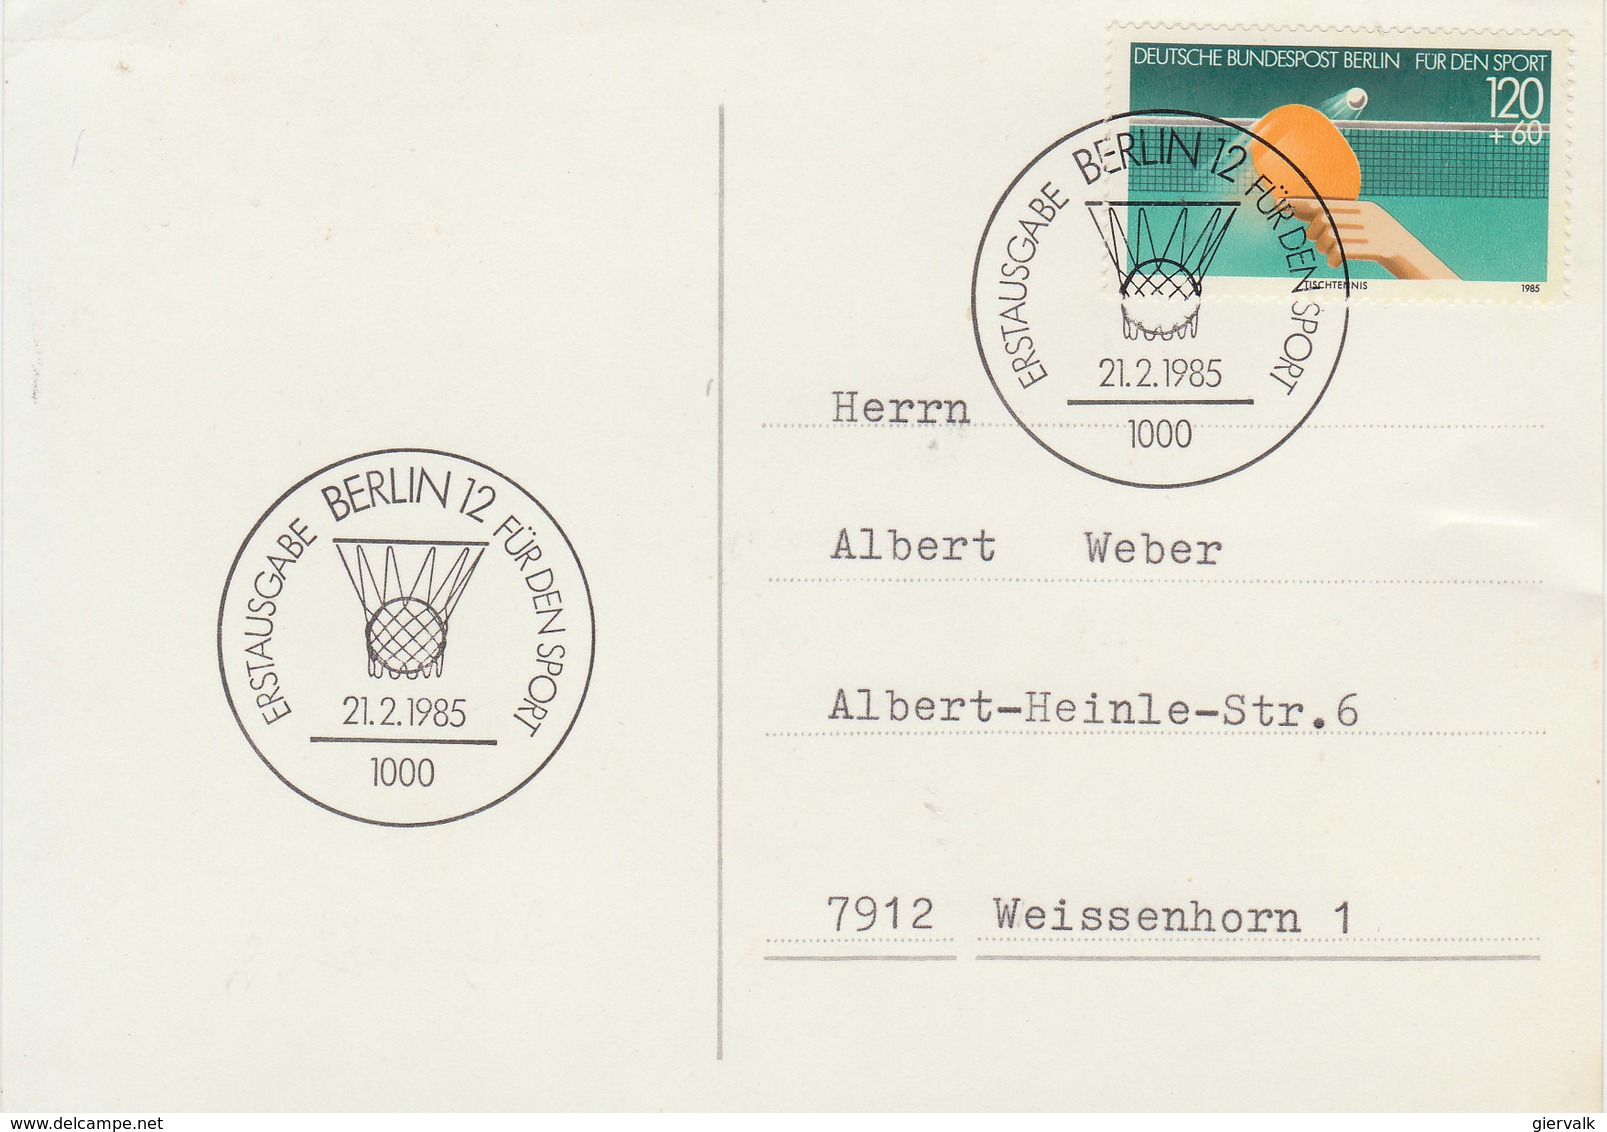 GERMANY (Berlin) 1985 Postcard Table Tennis With Special Cancellation.BARGAIN.!! - Tafeltennis